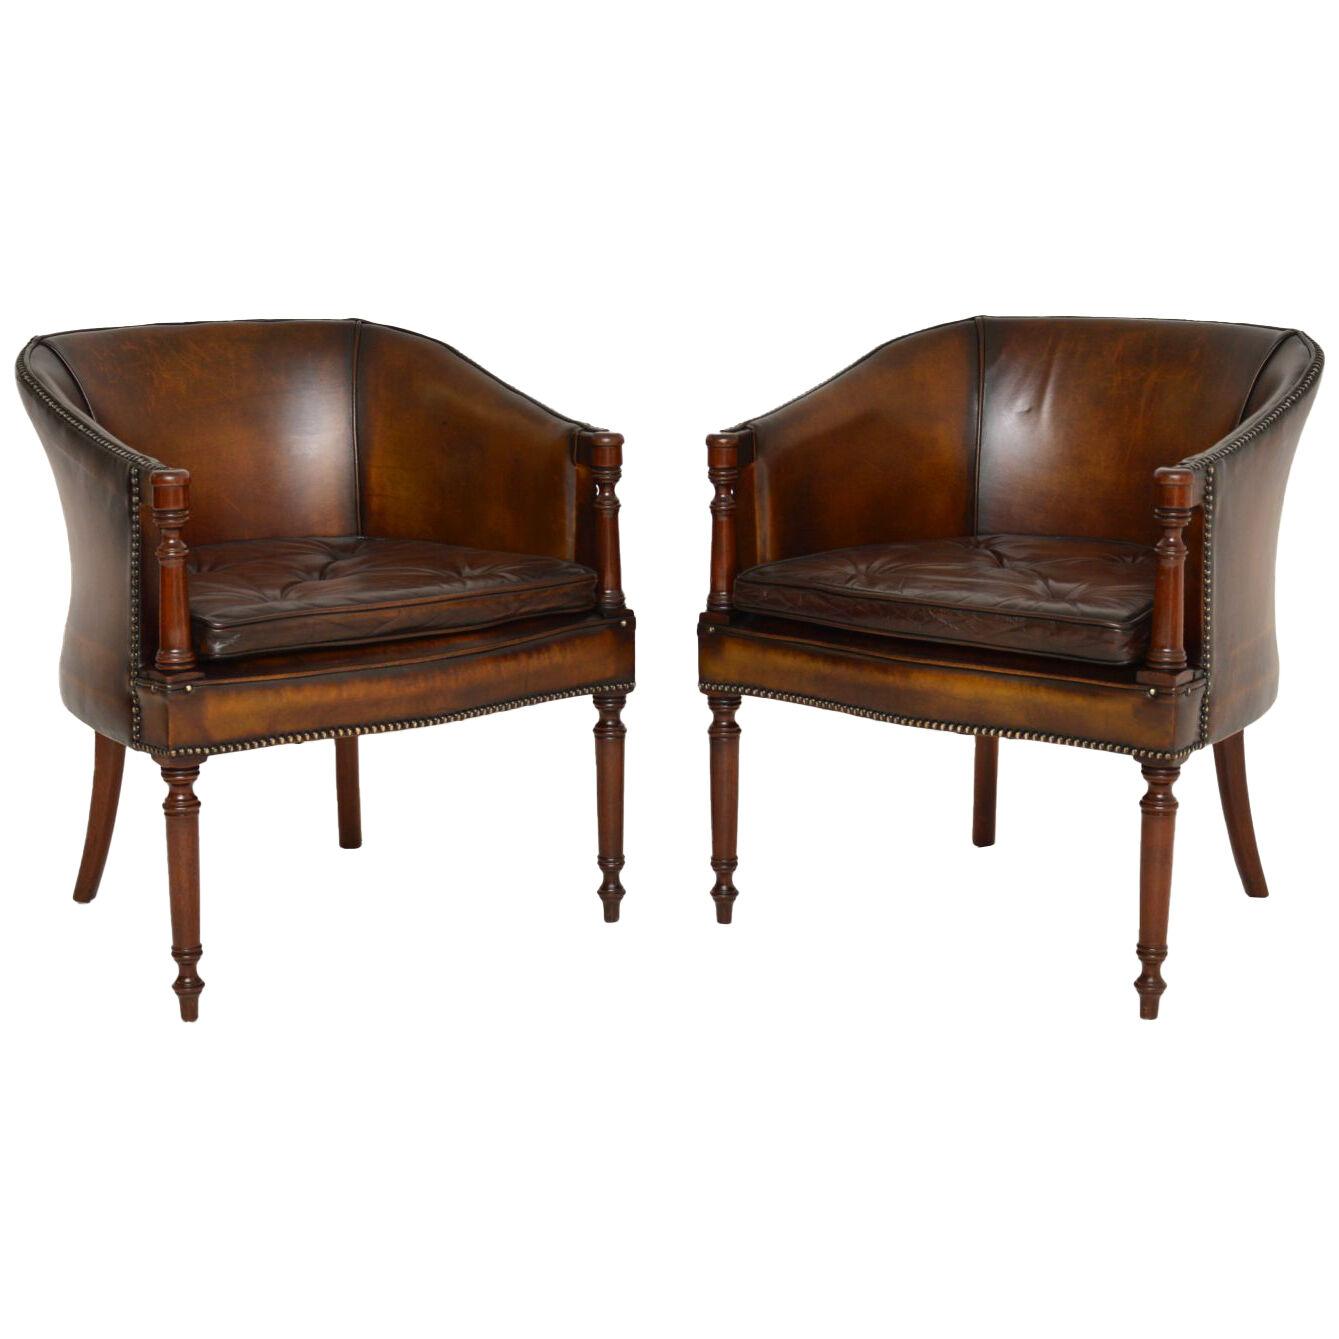 Pair of Antique Leather & Mahogany Armchairs / Desk Chairs